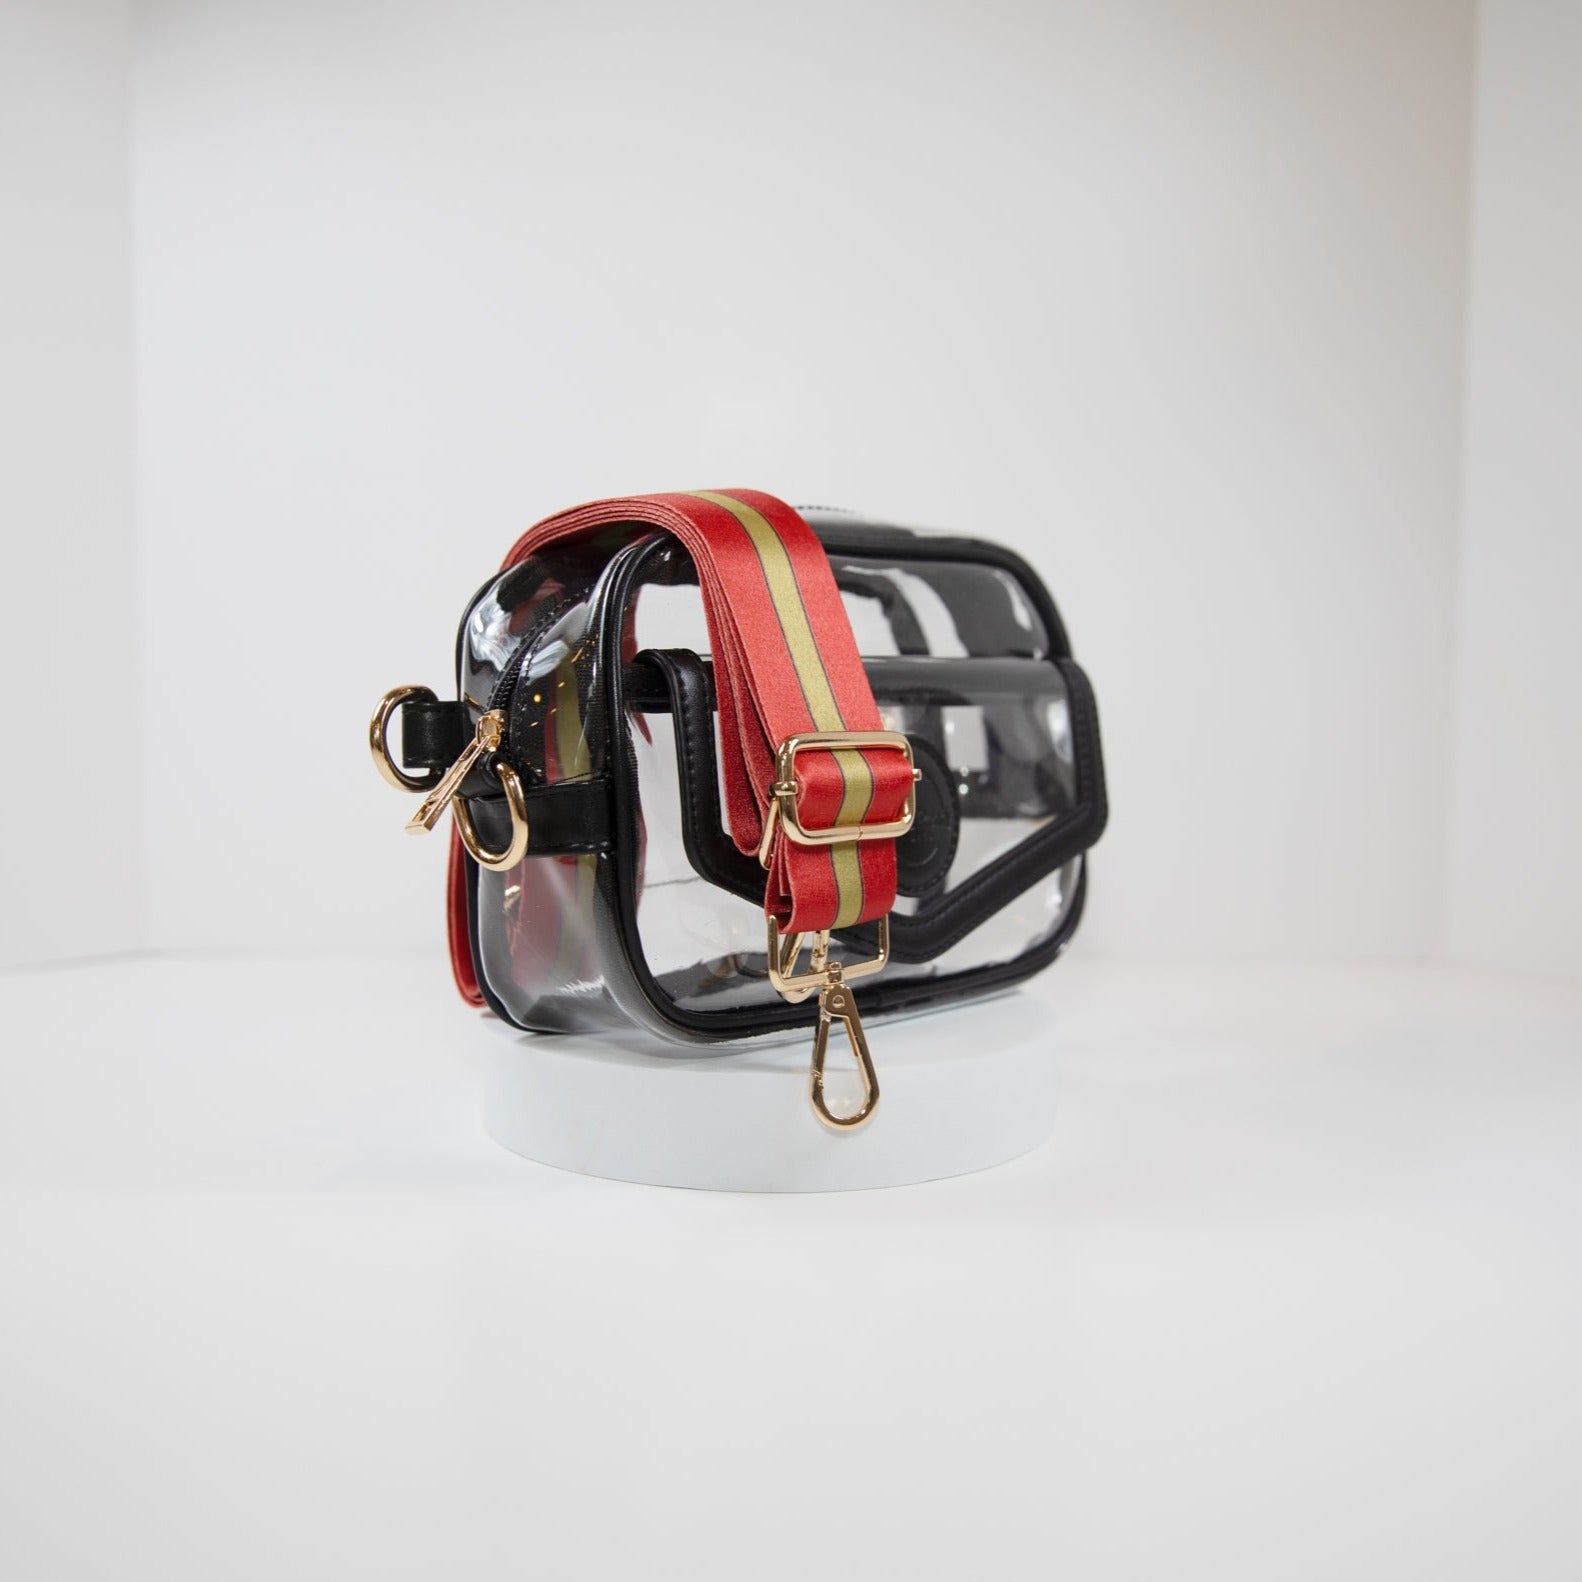 Clear Stadium Bag in black leather trim, side facing, with a crossbody strap in San Francisco 49er team colors.